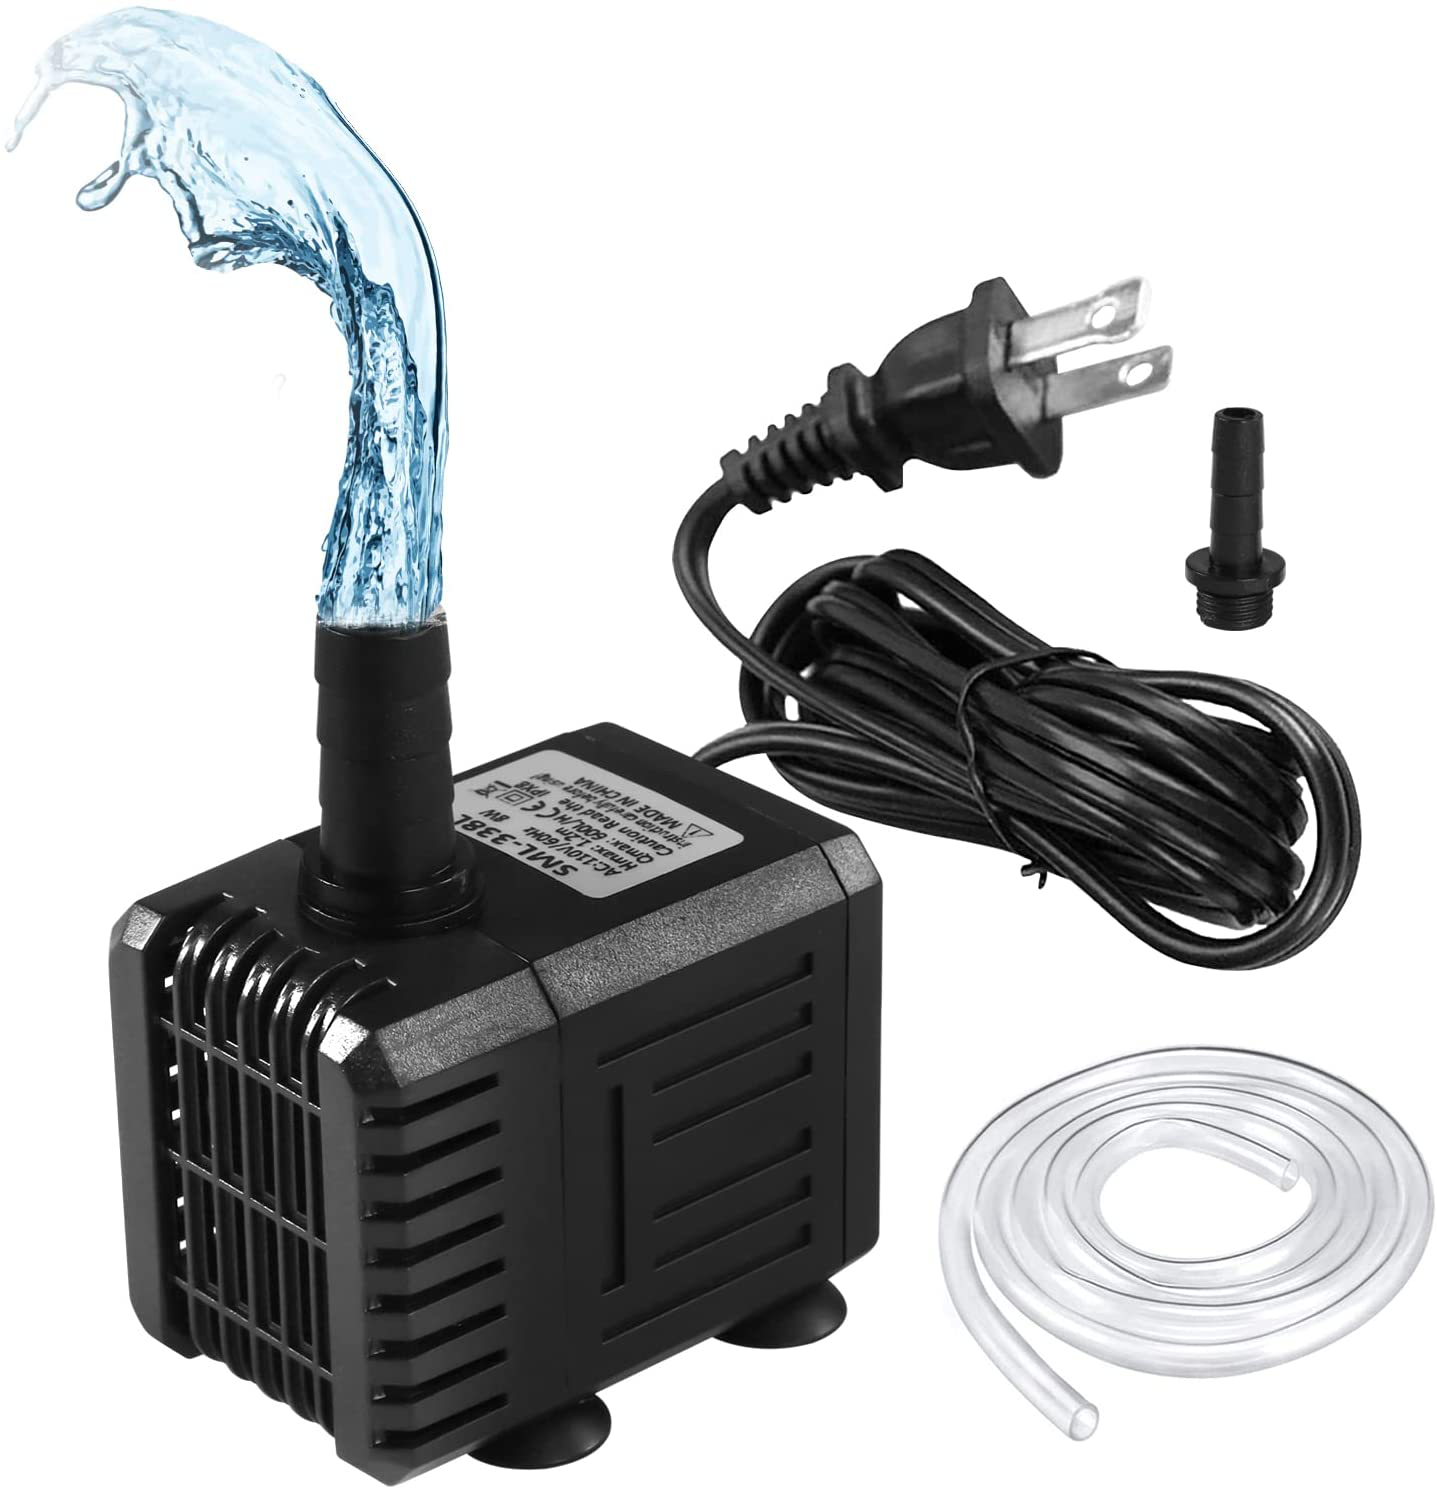 Fountain Pump, 520GPH Submersible Water Pump with Dry Burning Protection, 30W Small Fountain Pond Pump with 6.5Ft Tubing (1/2 Inch ID), 2000L/H, 3 Nozzles for Aquariums, Fish Tank, Hydroponics Animals & Pet Supplies > Pet Supplies > Fish Supplies > Aquarium & Pond Tubing AsFrost 150GPH  